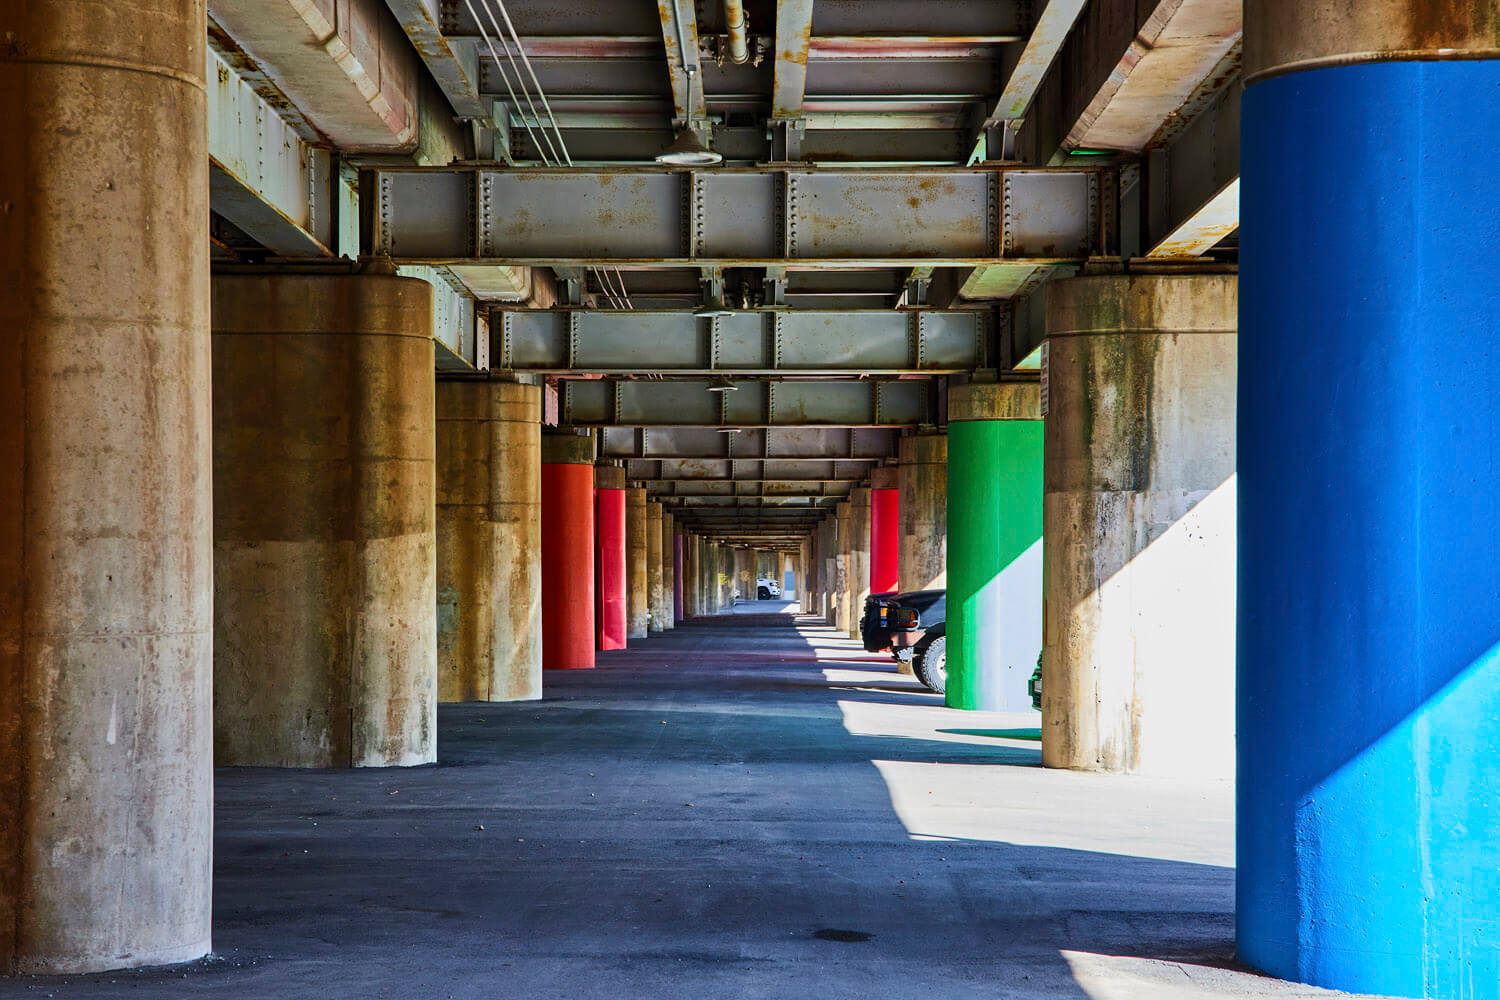 Parking under Train Tracks with Colored Columns